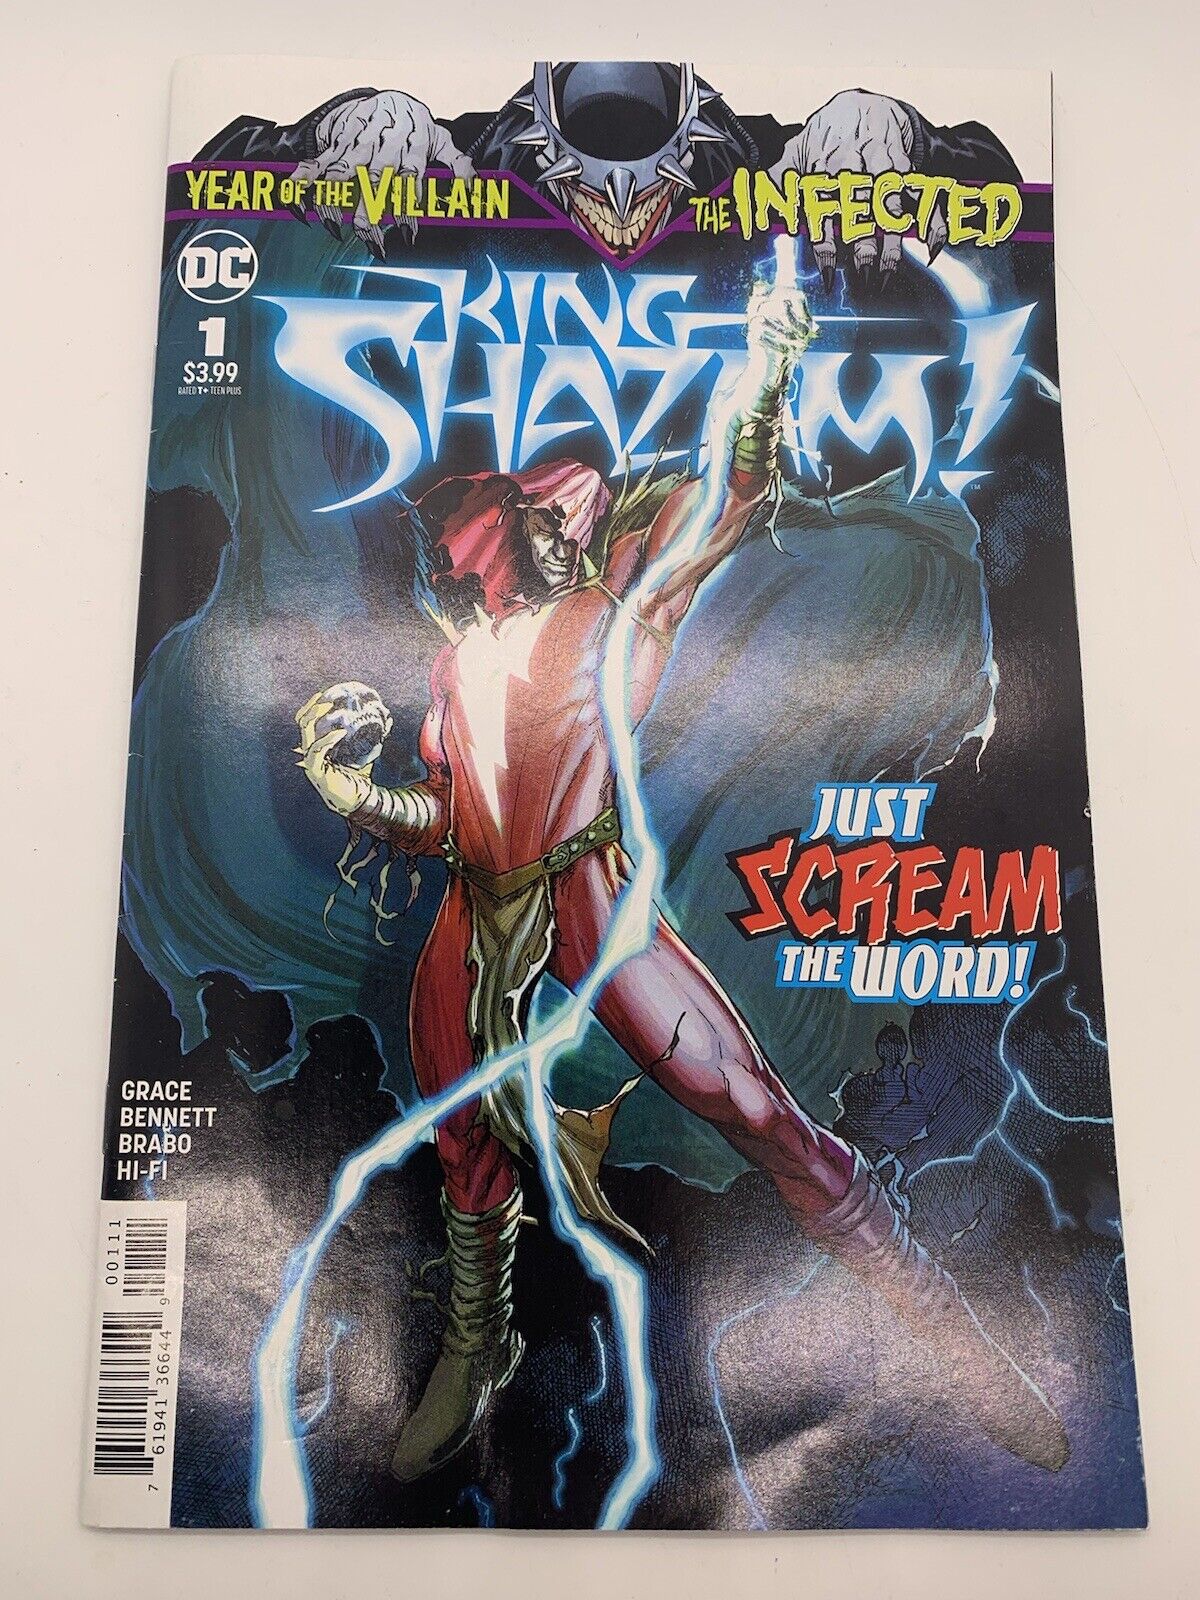 The Infected: King Shazam #1 Main Cover Year of the Villain DC COMICS NM